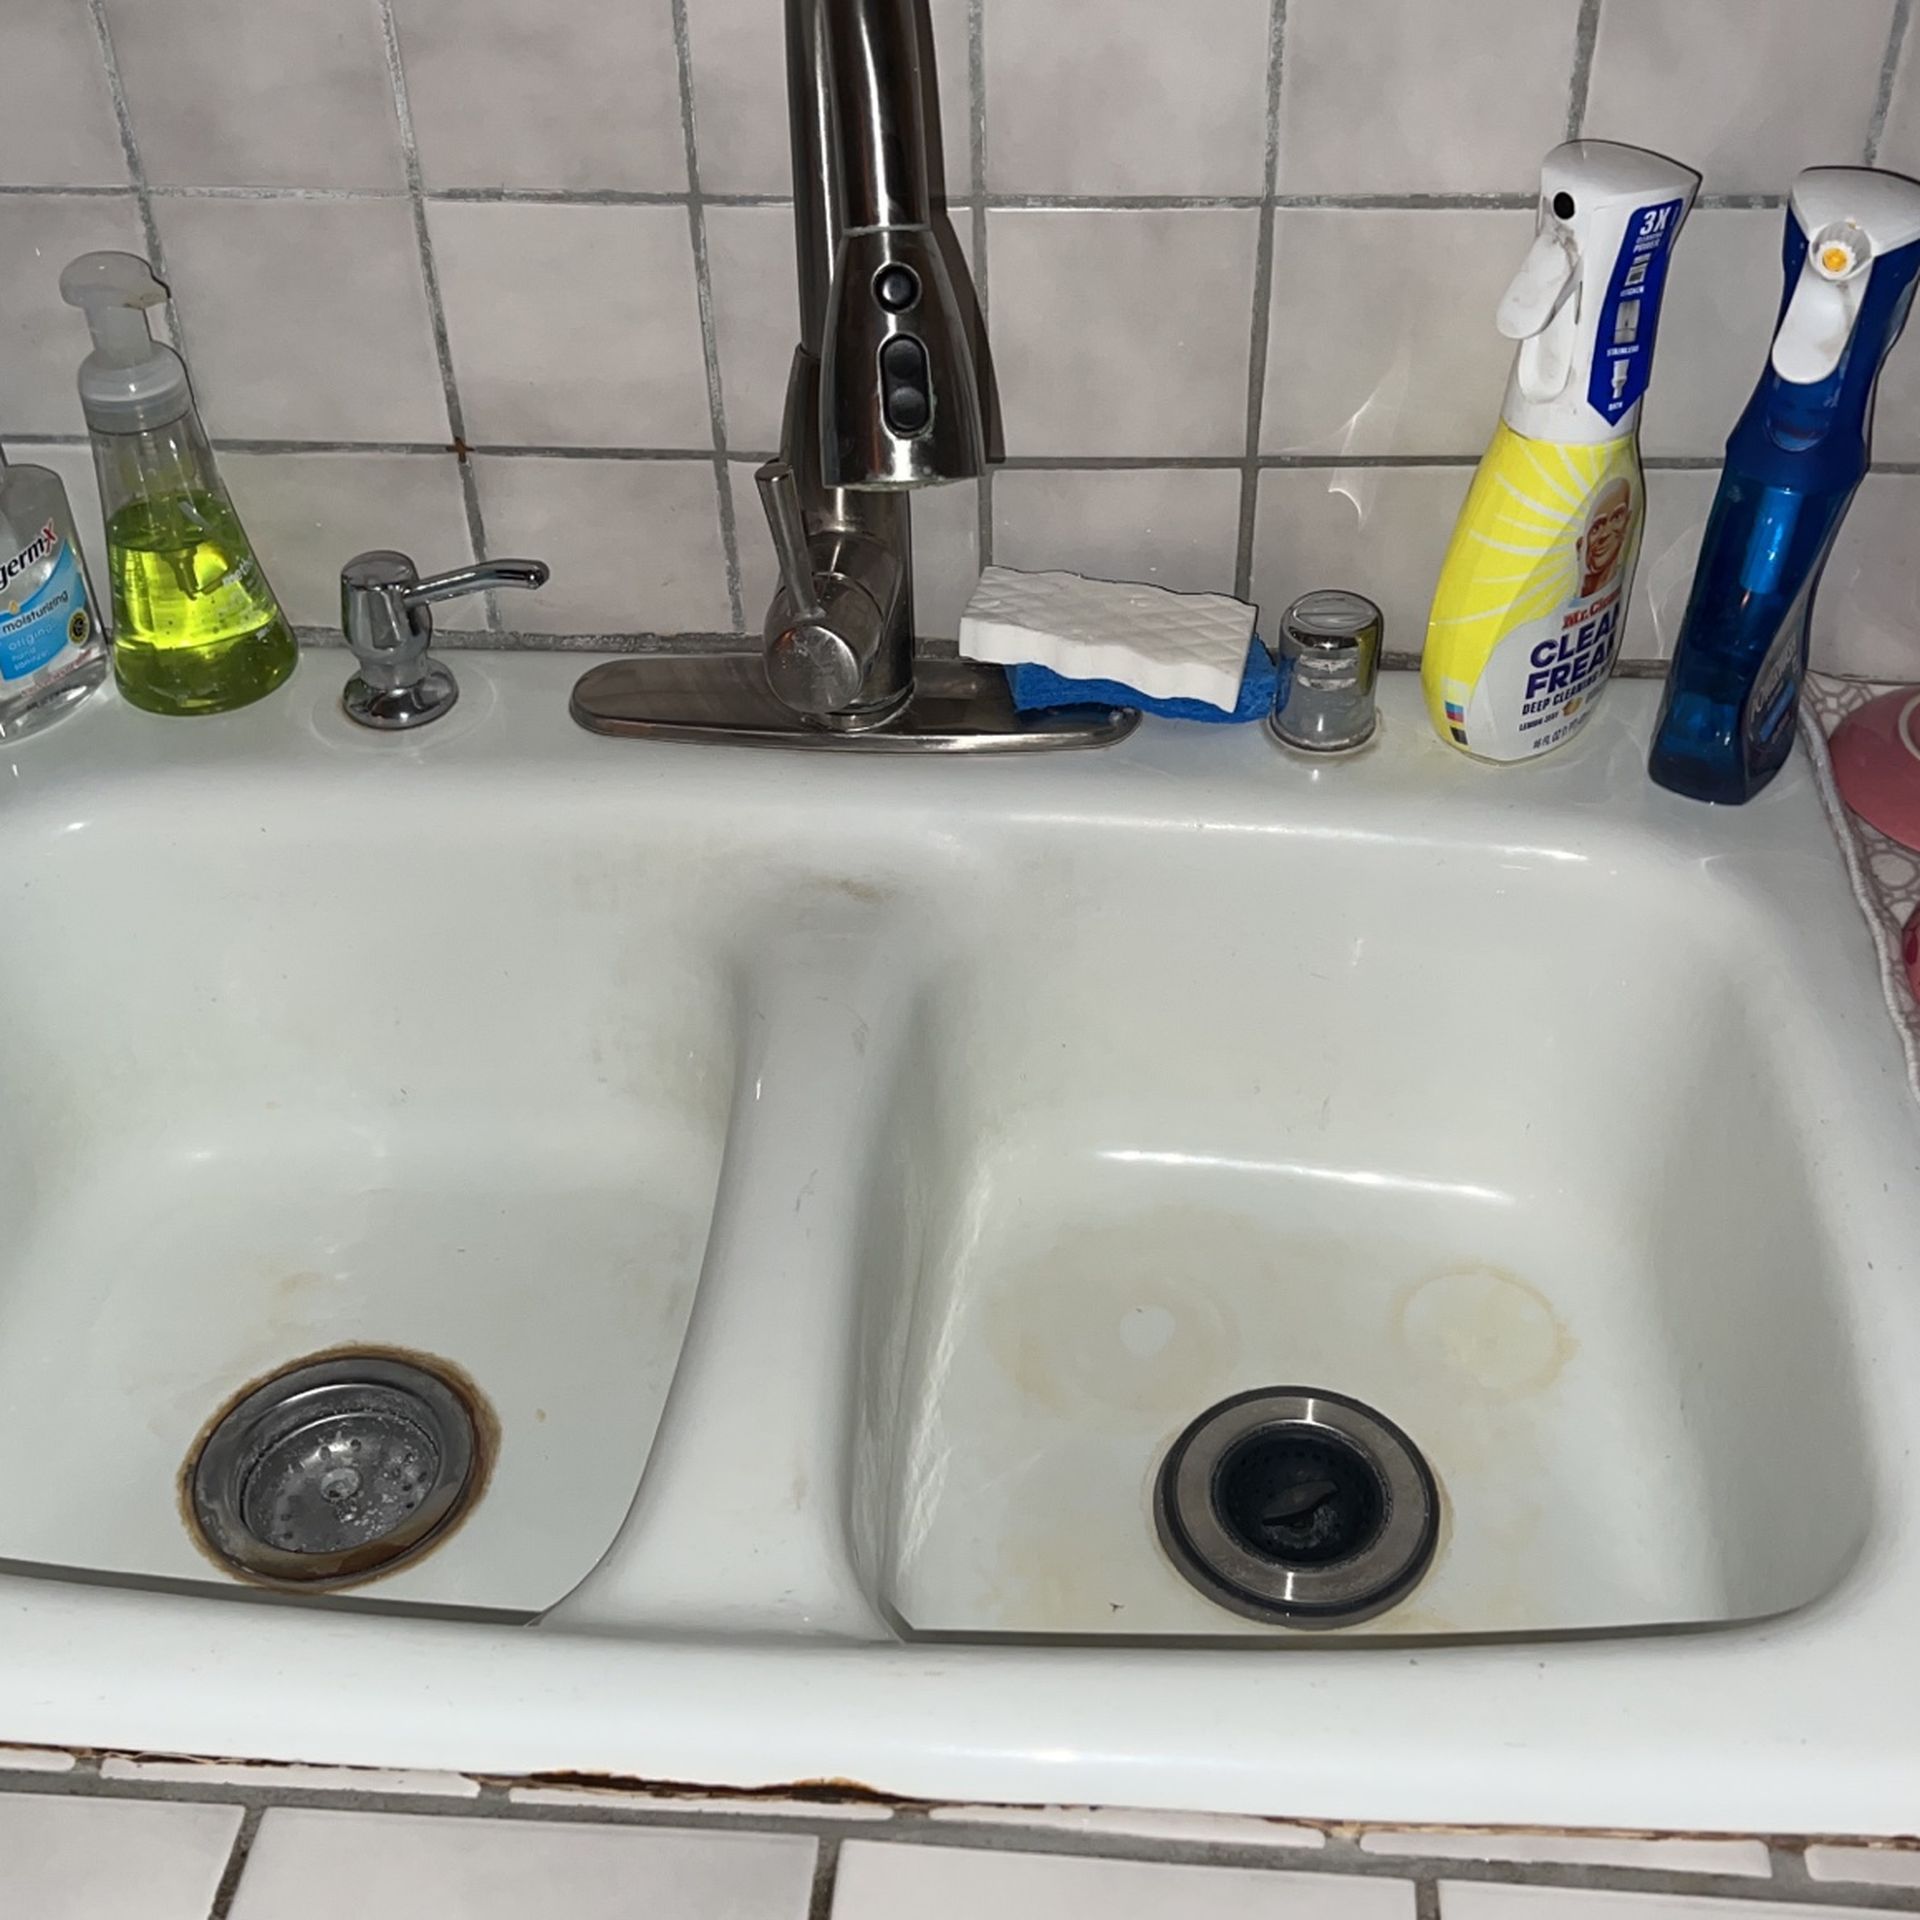 White Farm House Sink Double Basin  Make Reasonable Offer And It’s Yours! Also Have The Garbage Disposal For It Separate Offer For That, Works Great! 